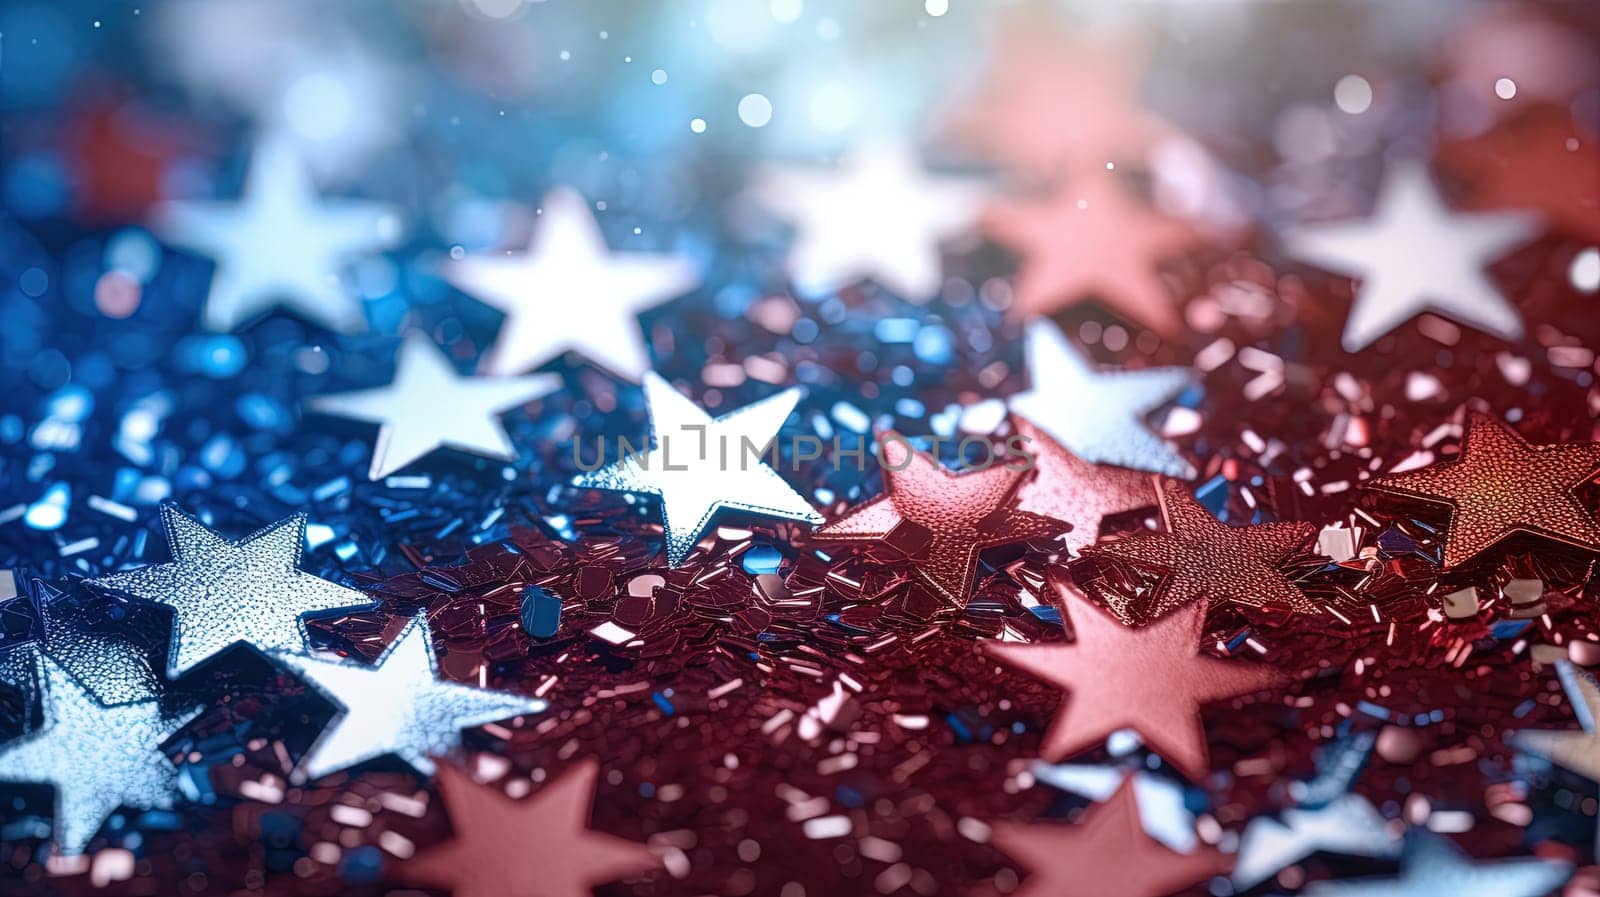 Abstract shiny background with blue and golden glitter. Scattered confetti sparkles with shiny gold and blue color. Generated AI